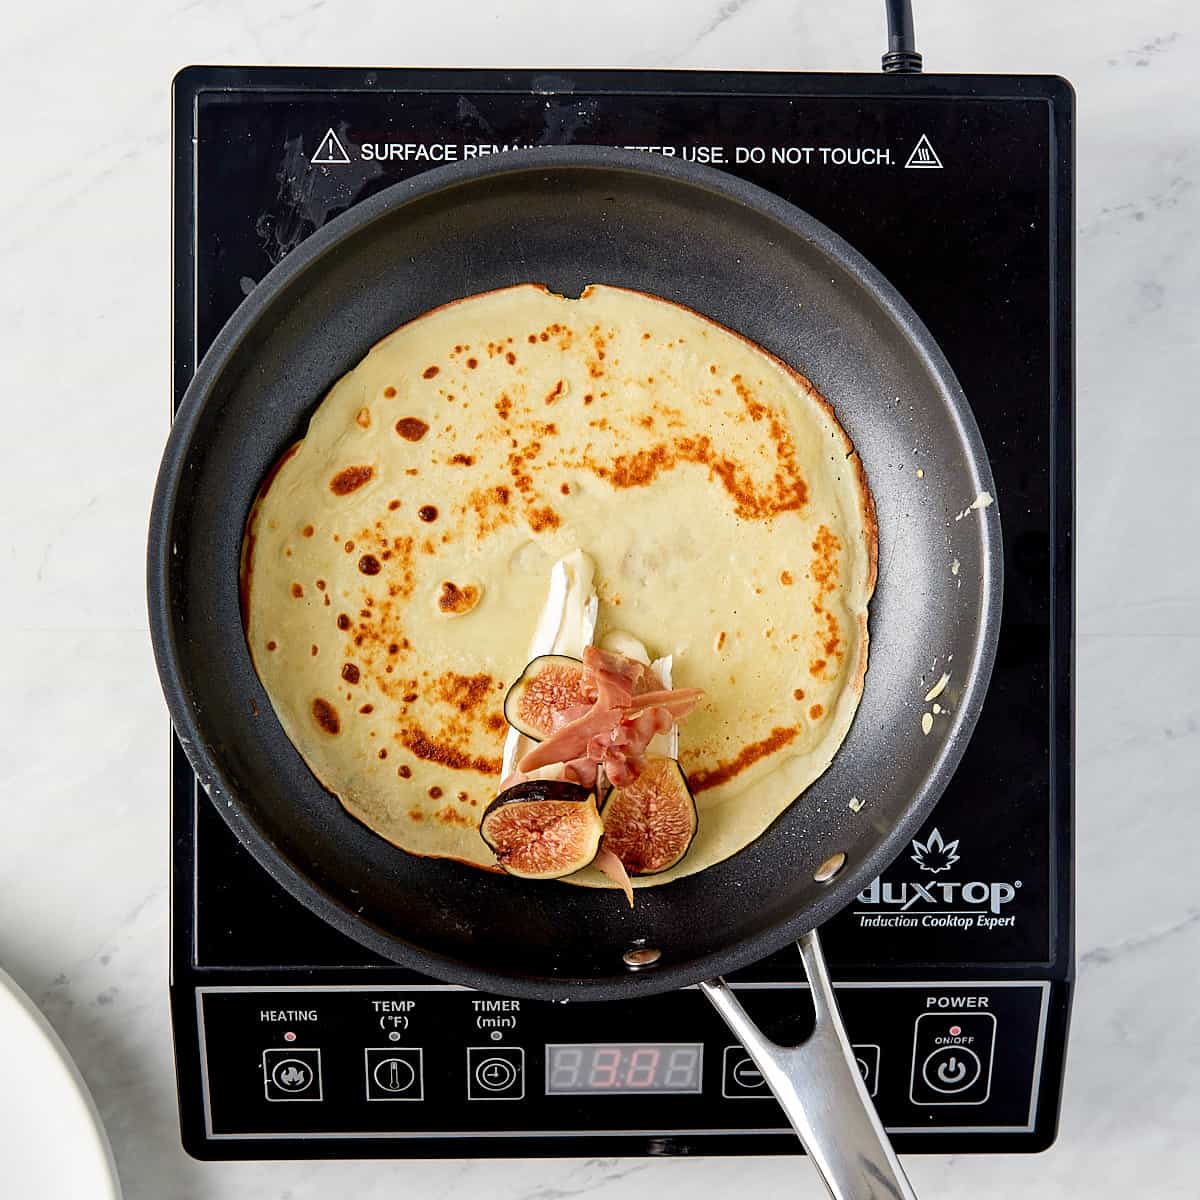 crepe being assembled in a pan on a cooktop